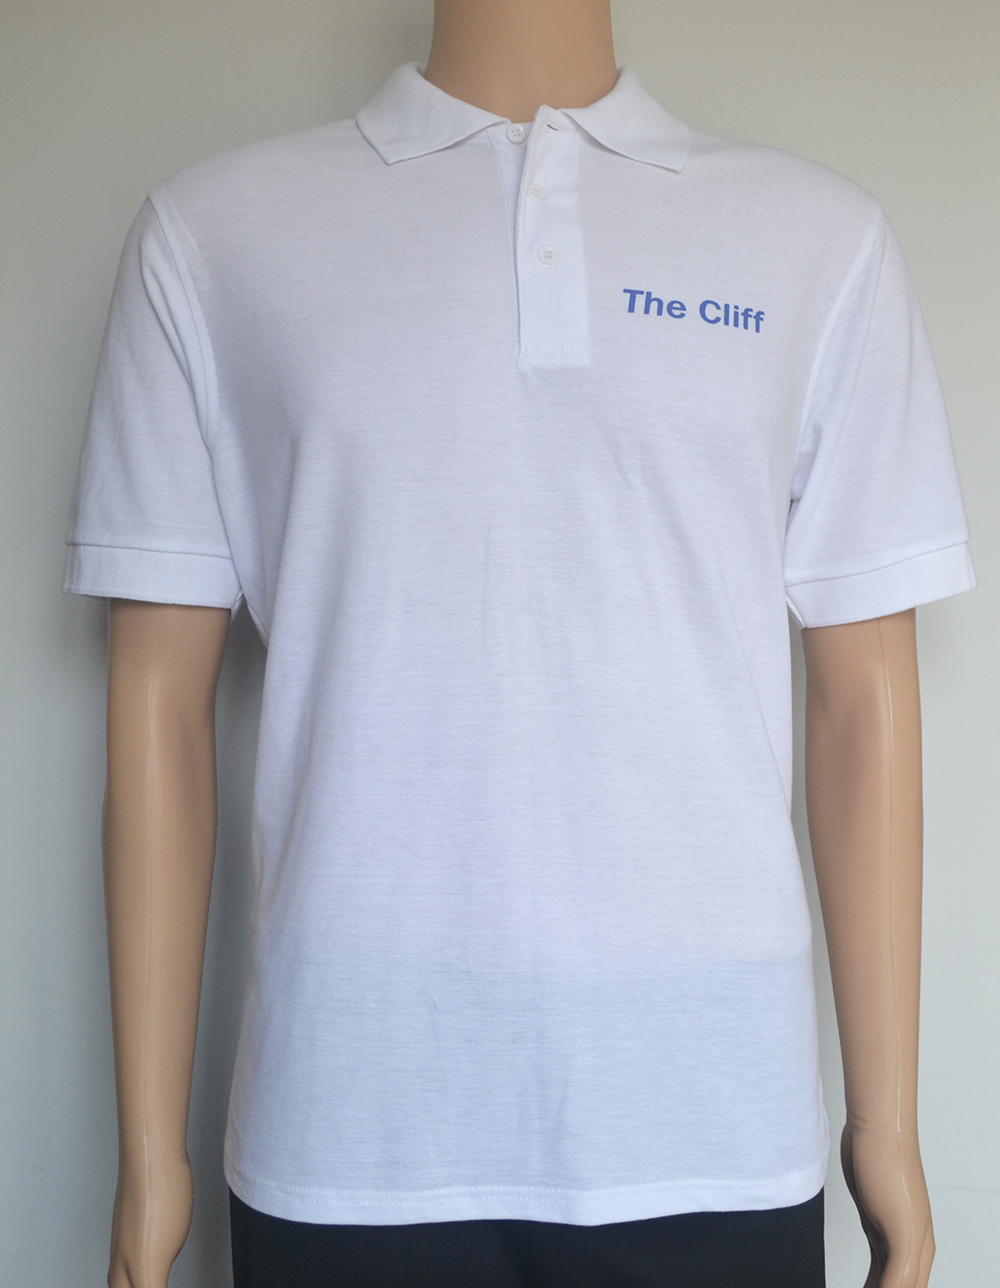 Custom your own polo shirts, 100% cotton company polo shirts with logo printed on left chest 